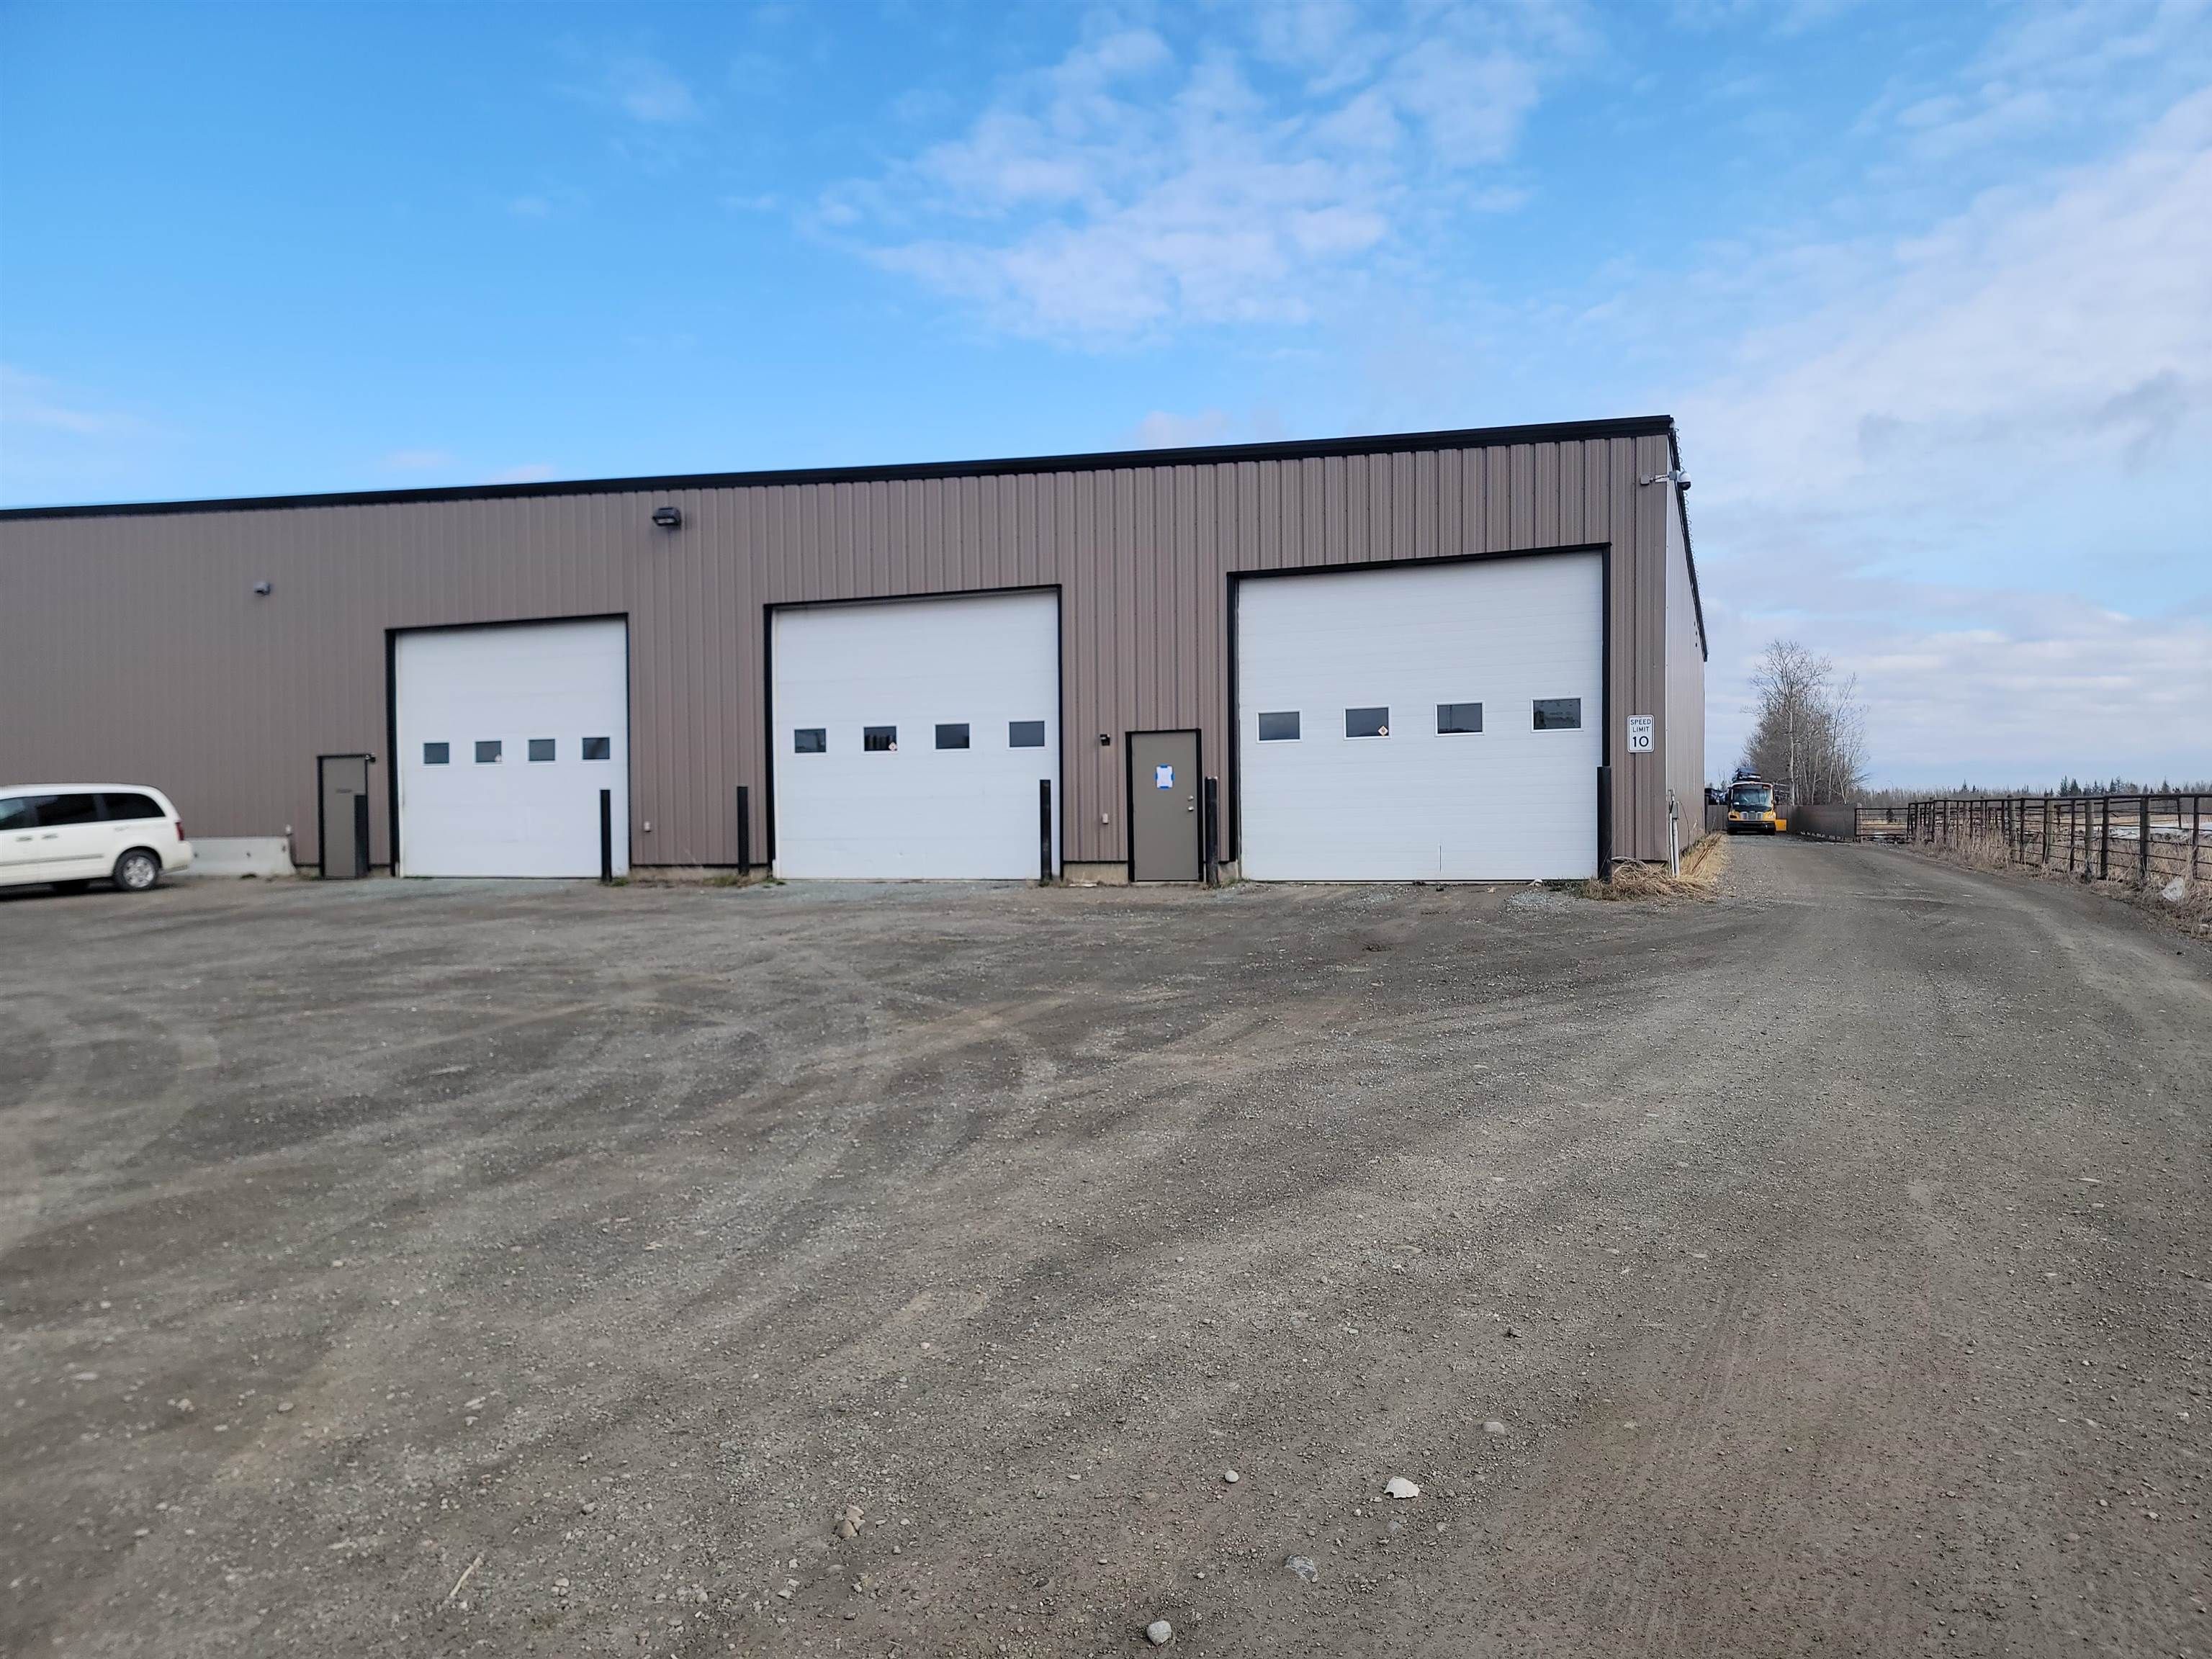 Main Photo: 1780 BOUNDARY Road in Prince George: Airport Industrial for lease (PG City South East)  : MLS®# C8051334